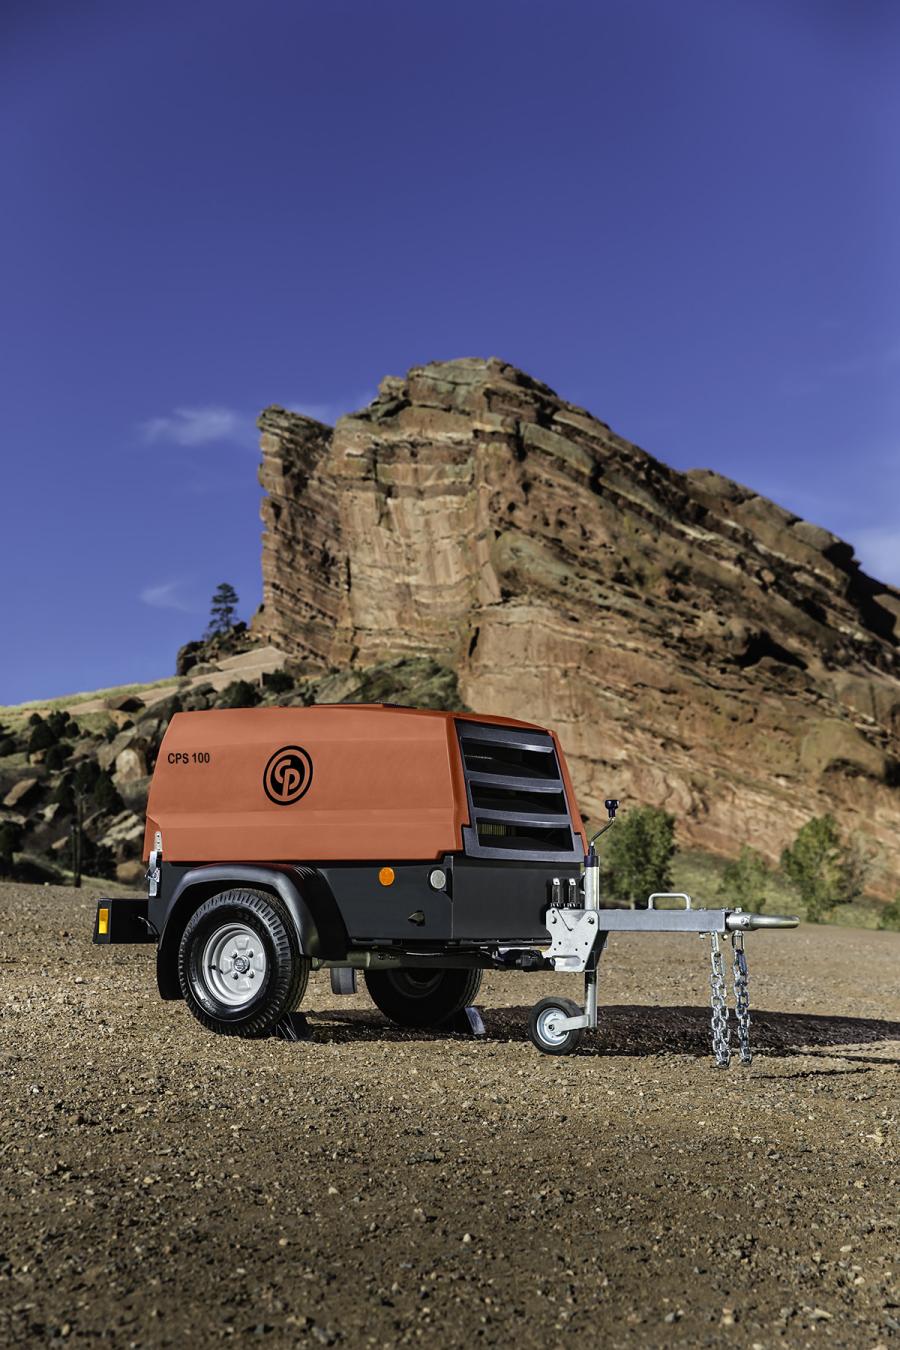 CP has expanded its core portfolio of air, power and flow products. Its lineup includes portable compressors, generators, light towers and pumps along with dedicated construction products including handheld pneumatic, electric and hydraulic tools.